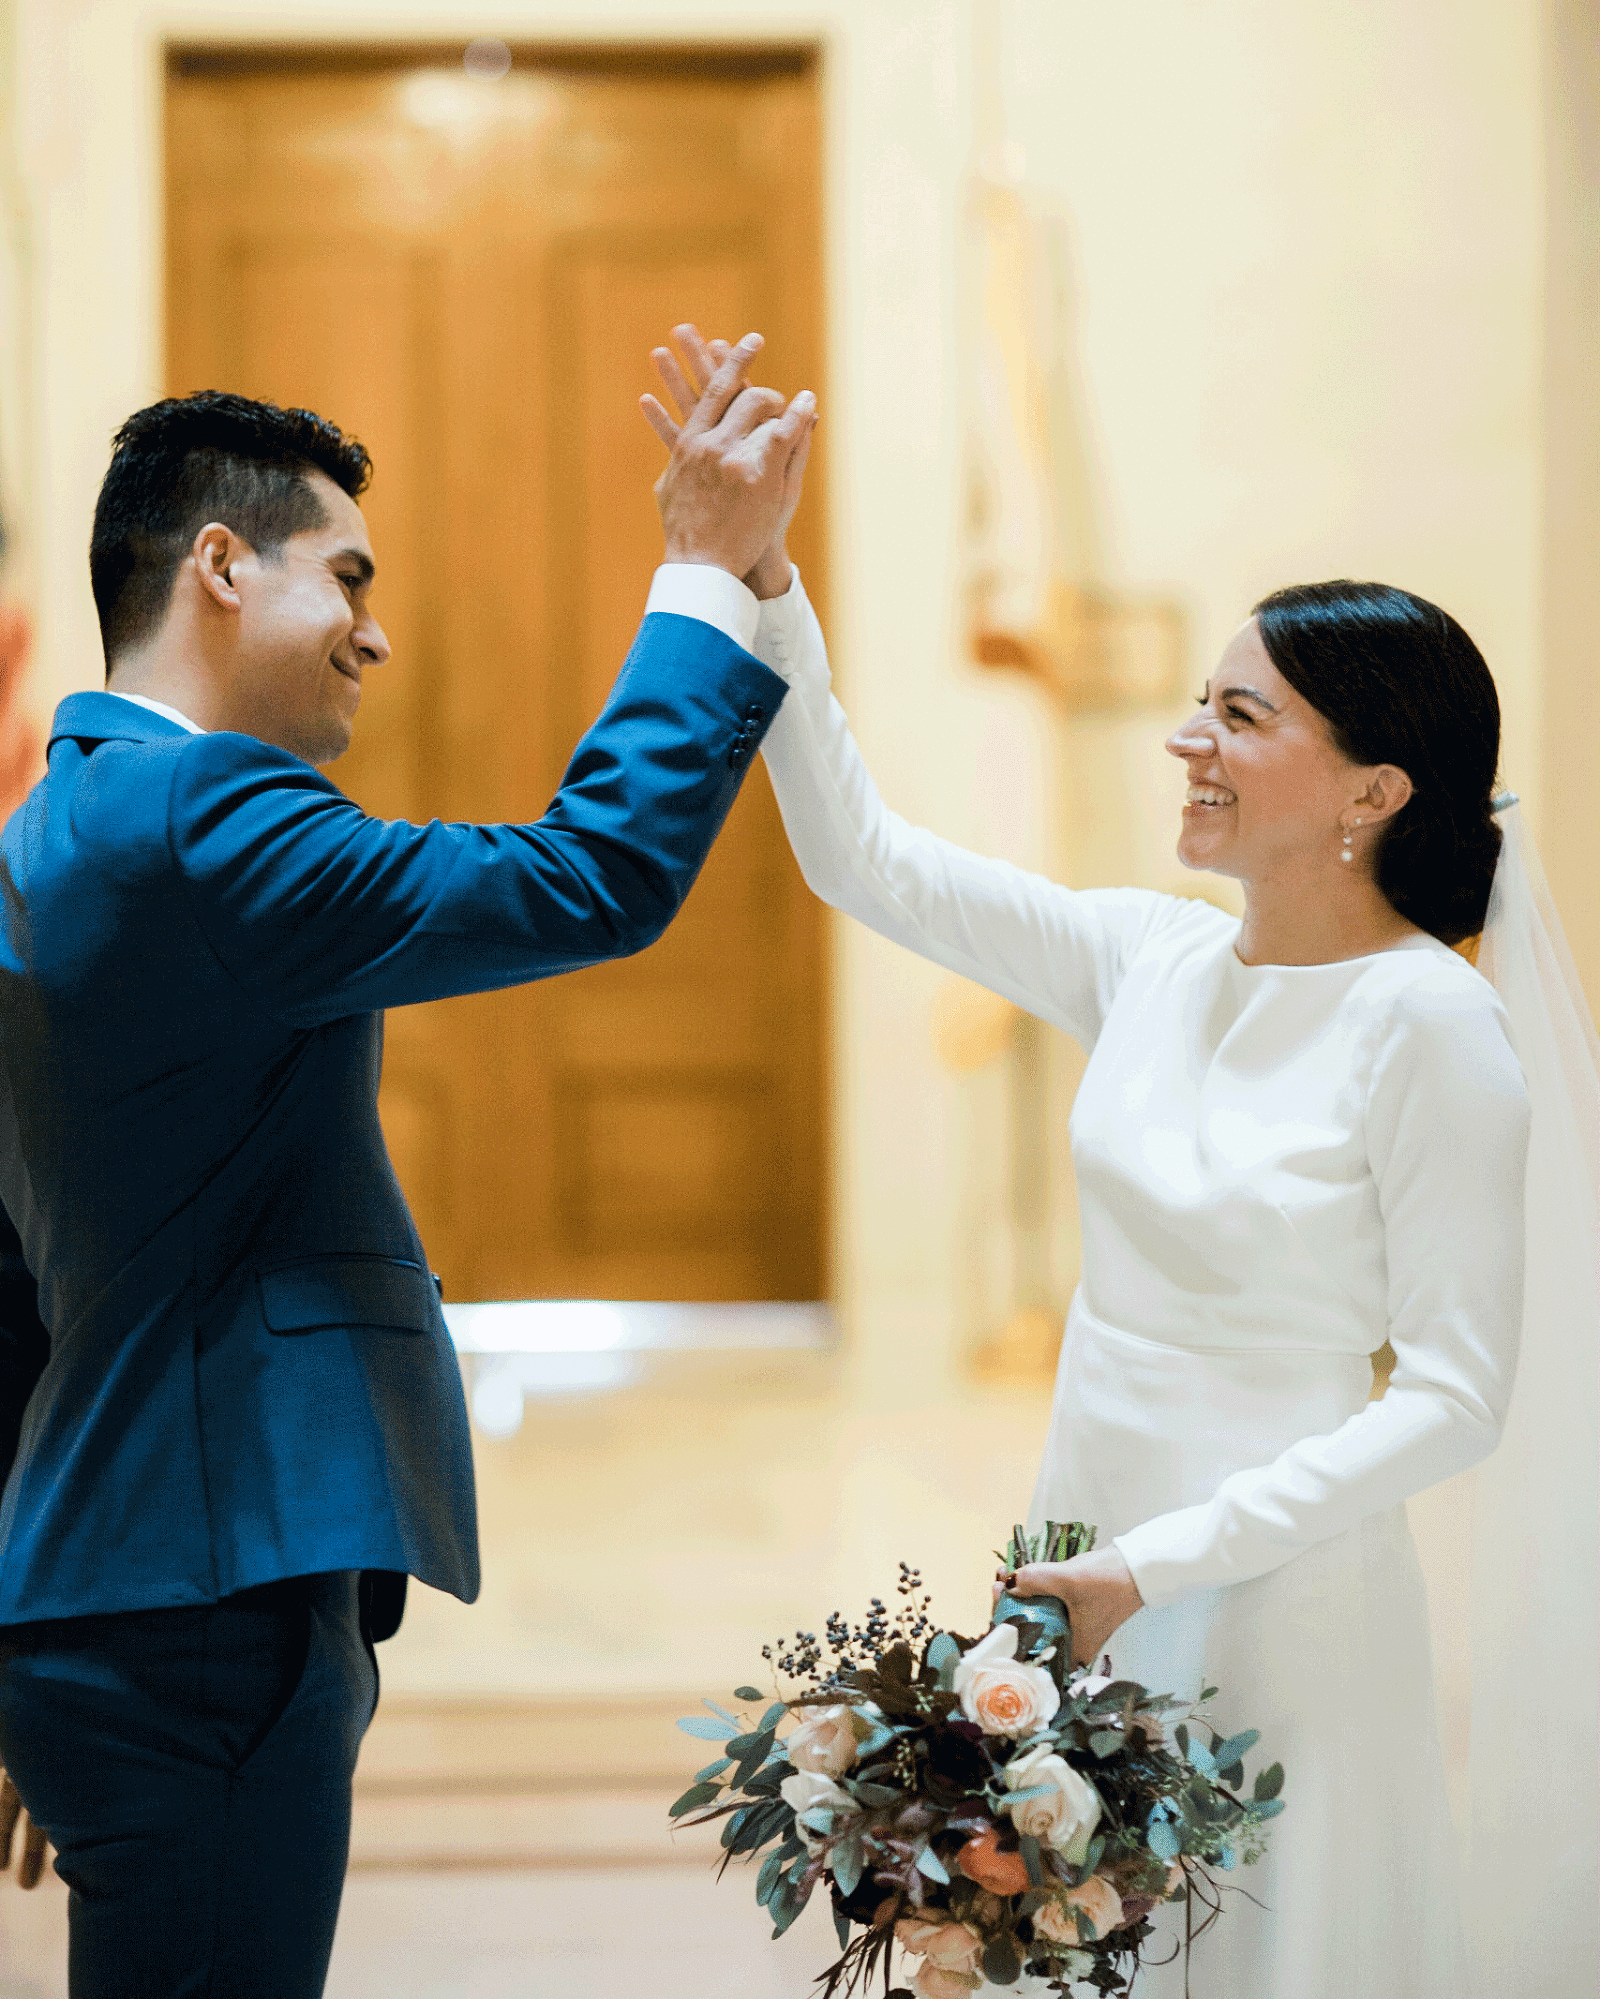 Animated gif of a wedding couple hi-fiving each other.